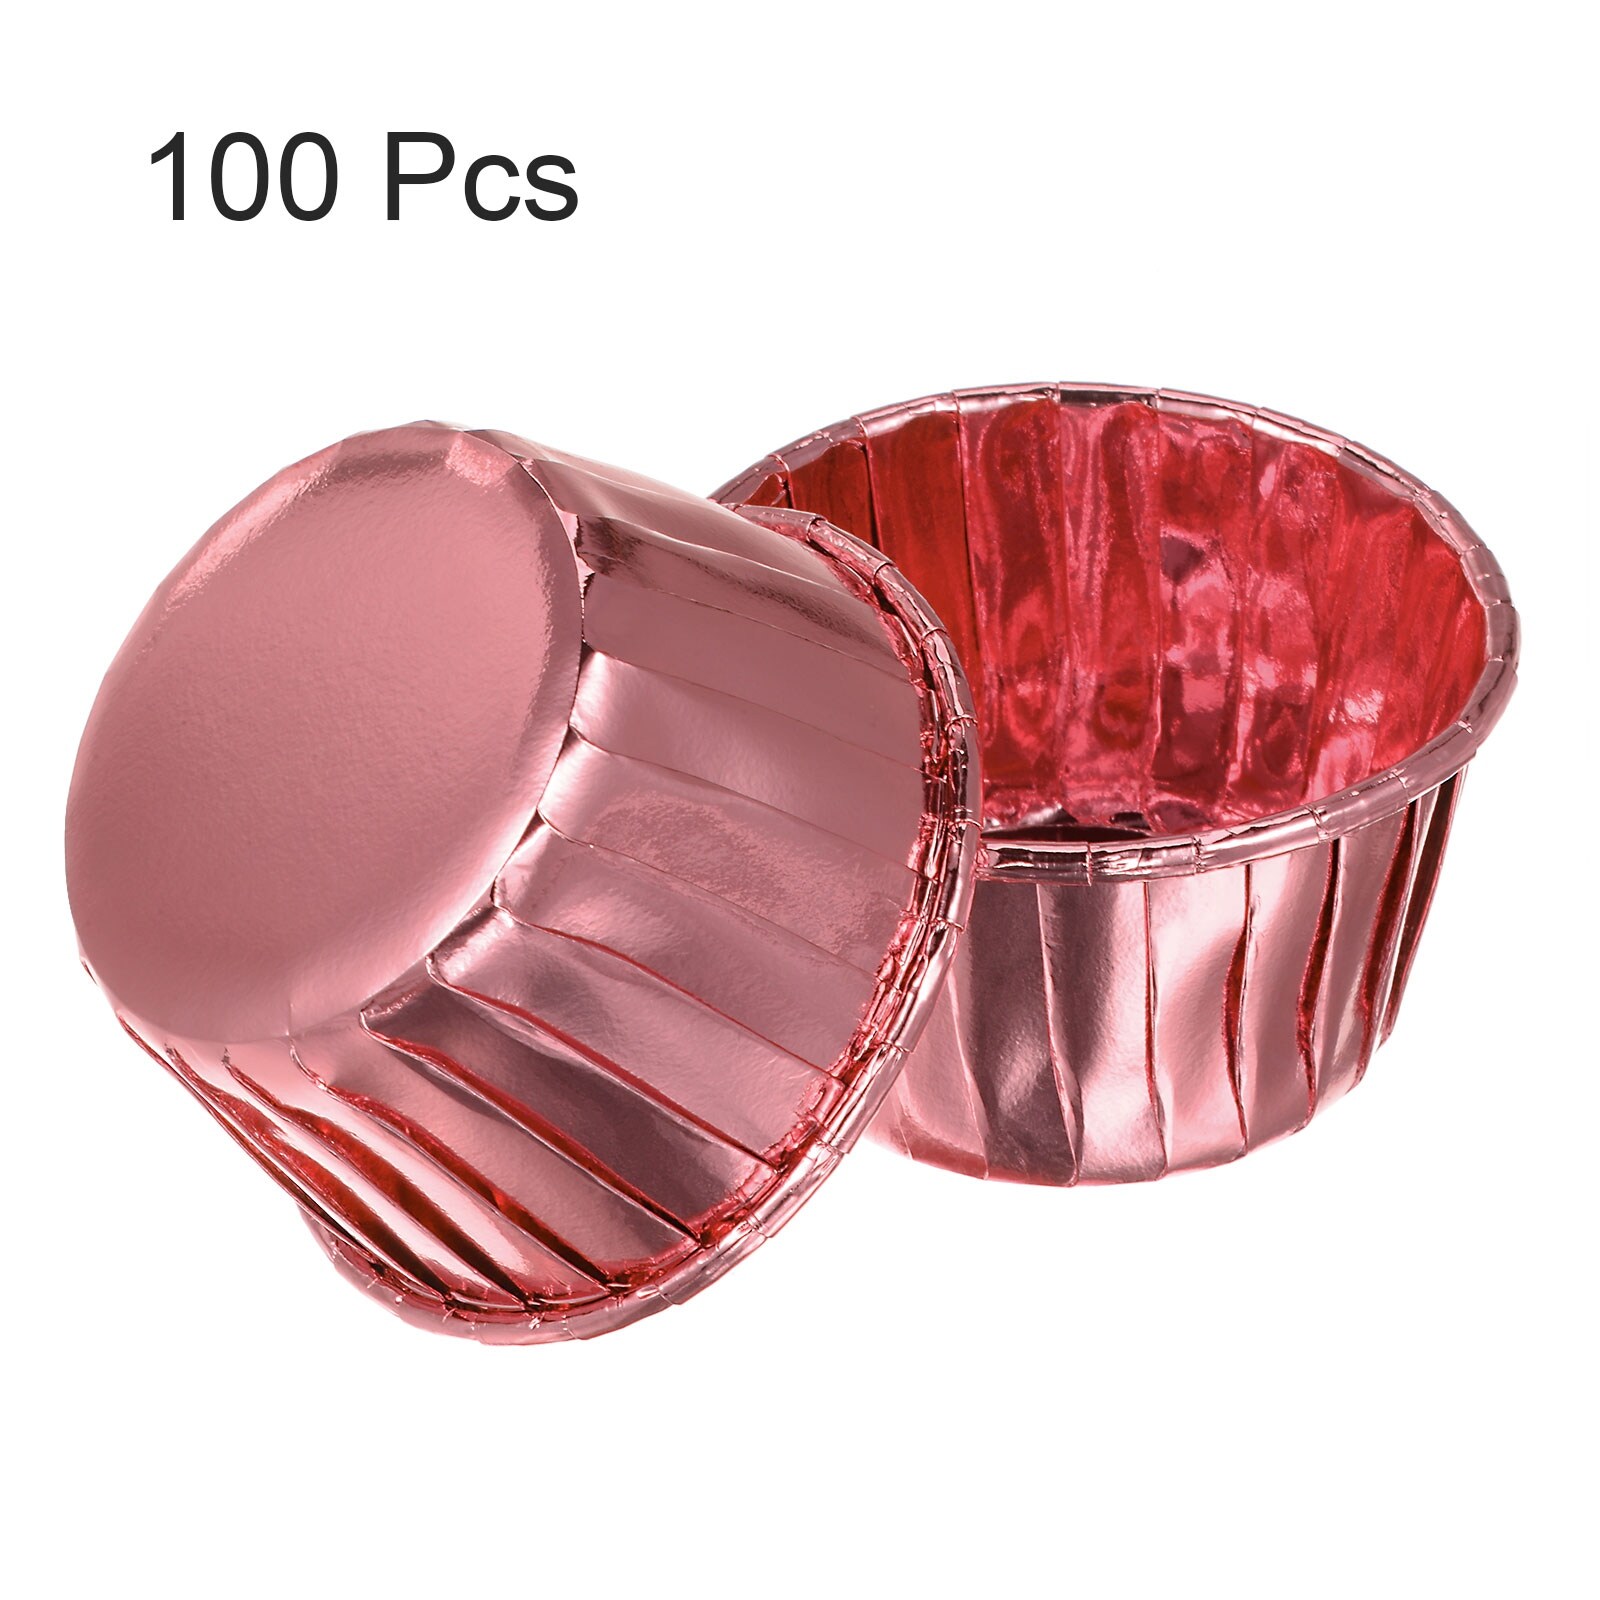 100Pcs Cake Cups GreaseProof Heat Resistant Aluminum Foil Cupcake Liners  Wrappers Baking Supplies - Bed Bath & Beyond - 36260755